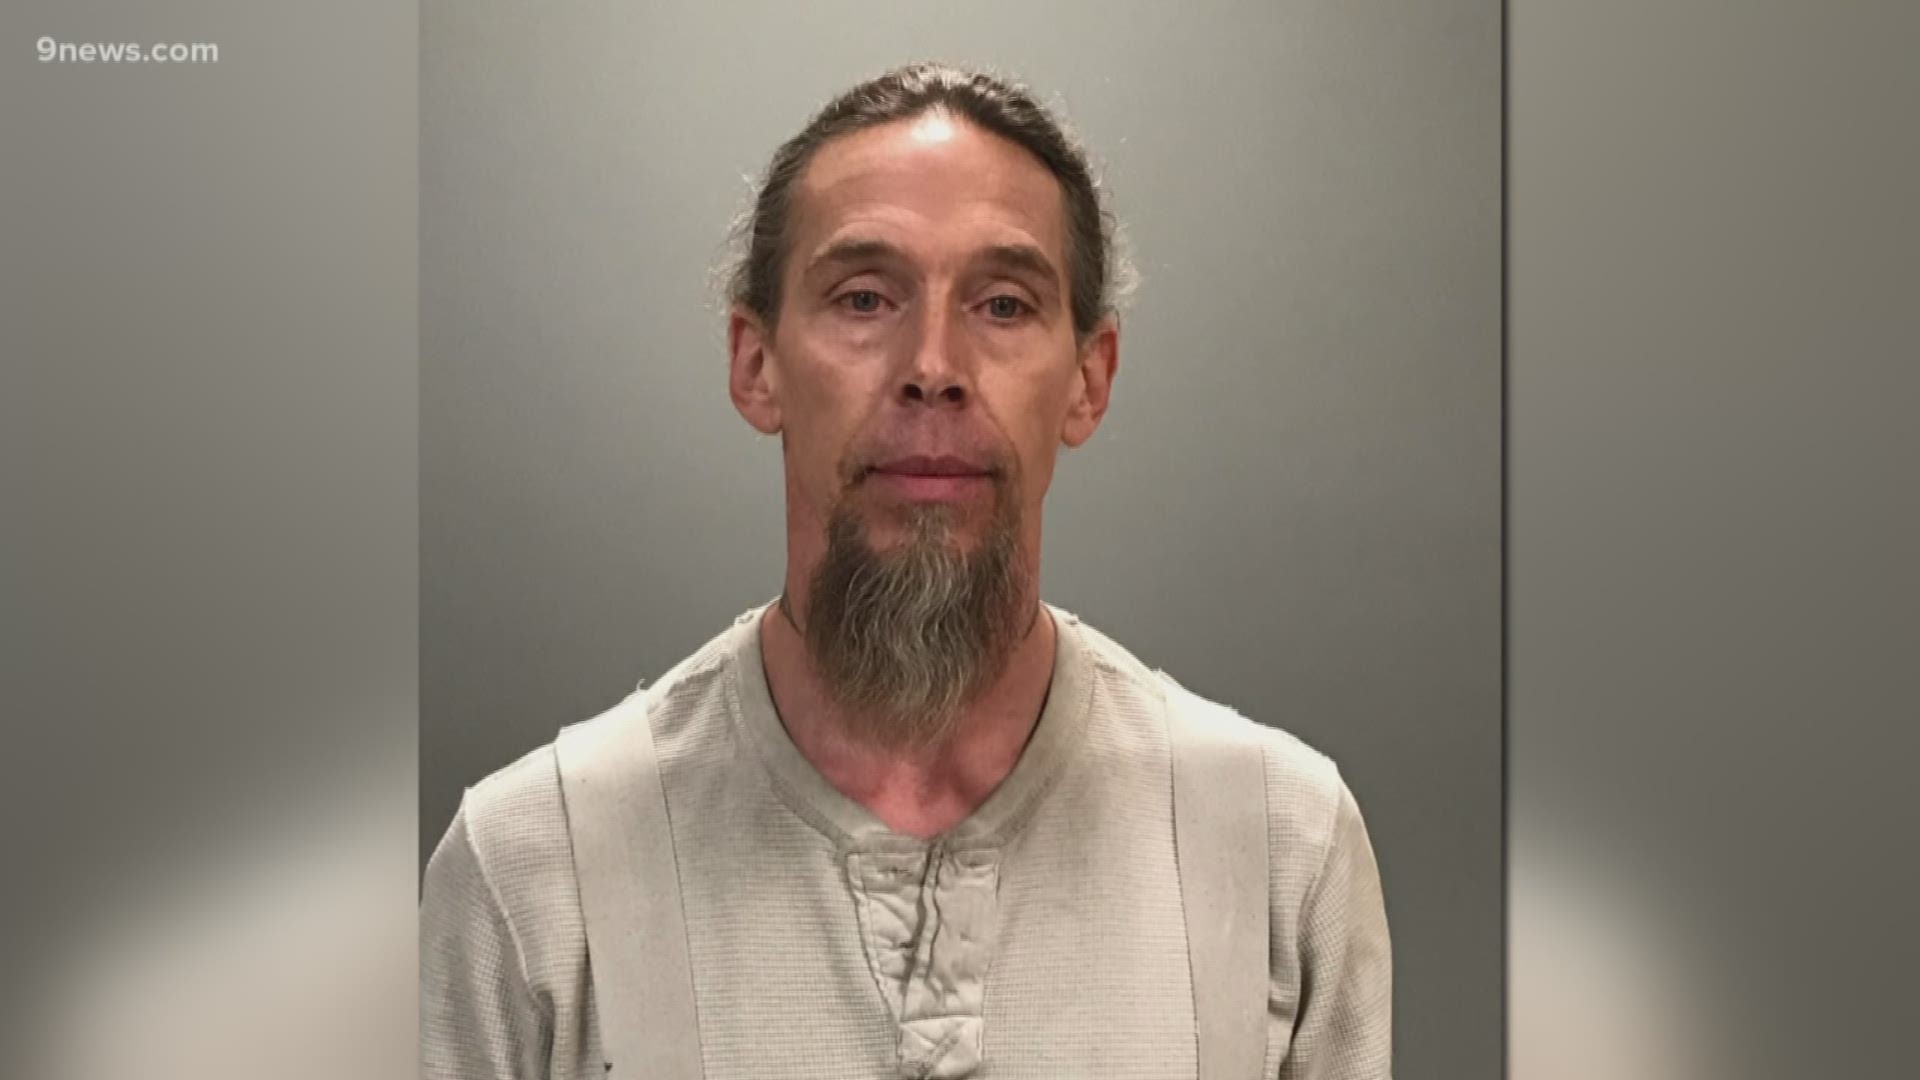 The 51-year-old man is facing at least two felony counts of assault for the alleged attack on June 12.